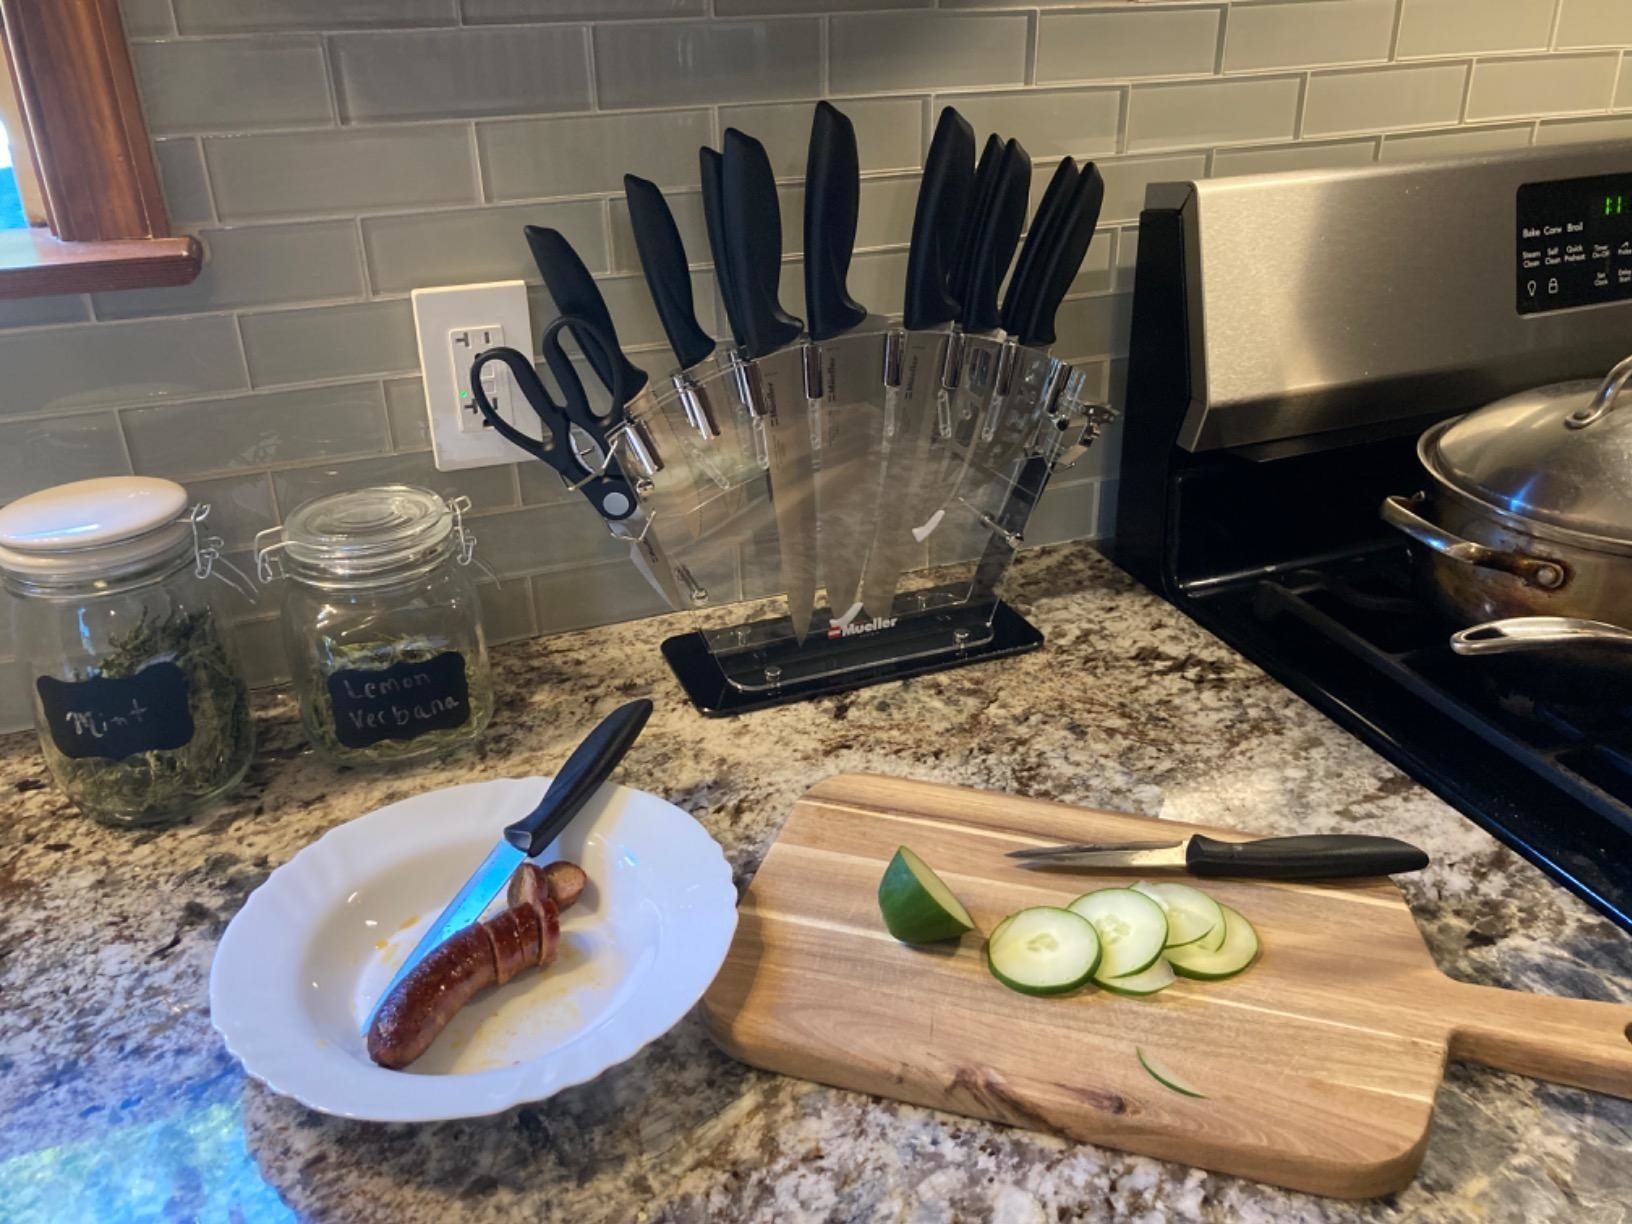 A clear acrylic base holding cooking knives